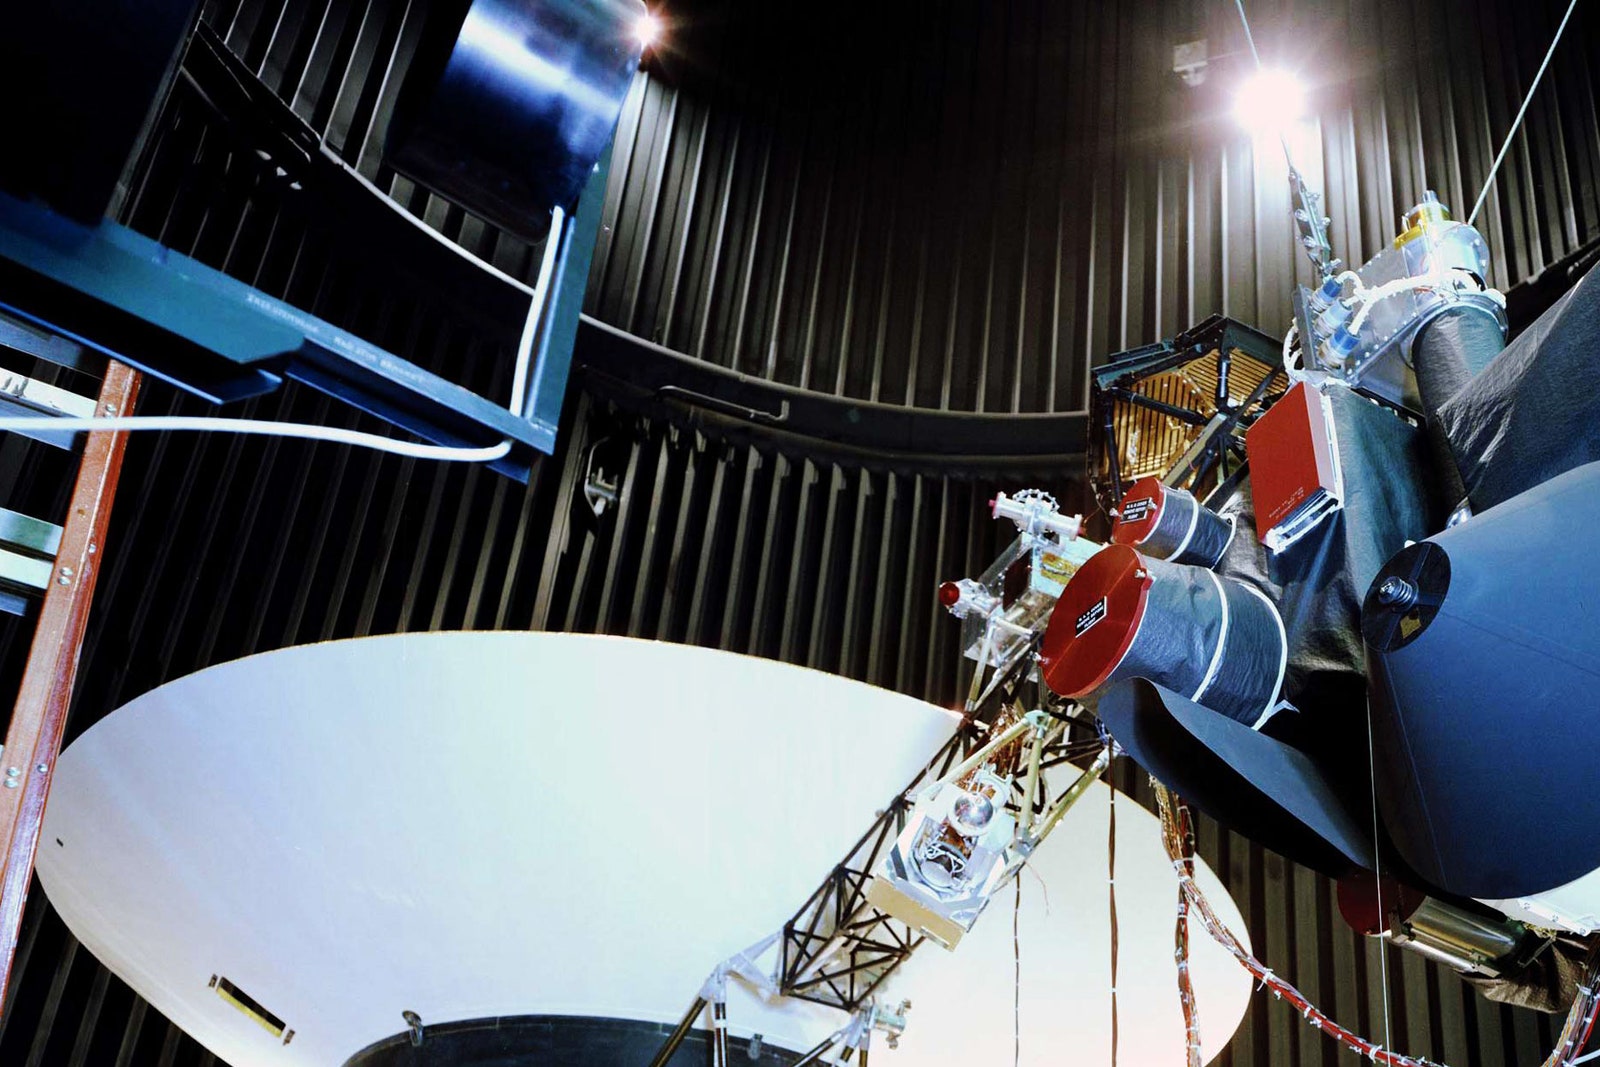 The Voyager proof test model in a space simulator chamber